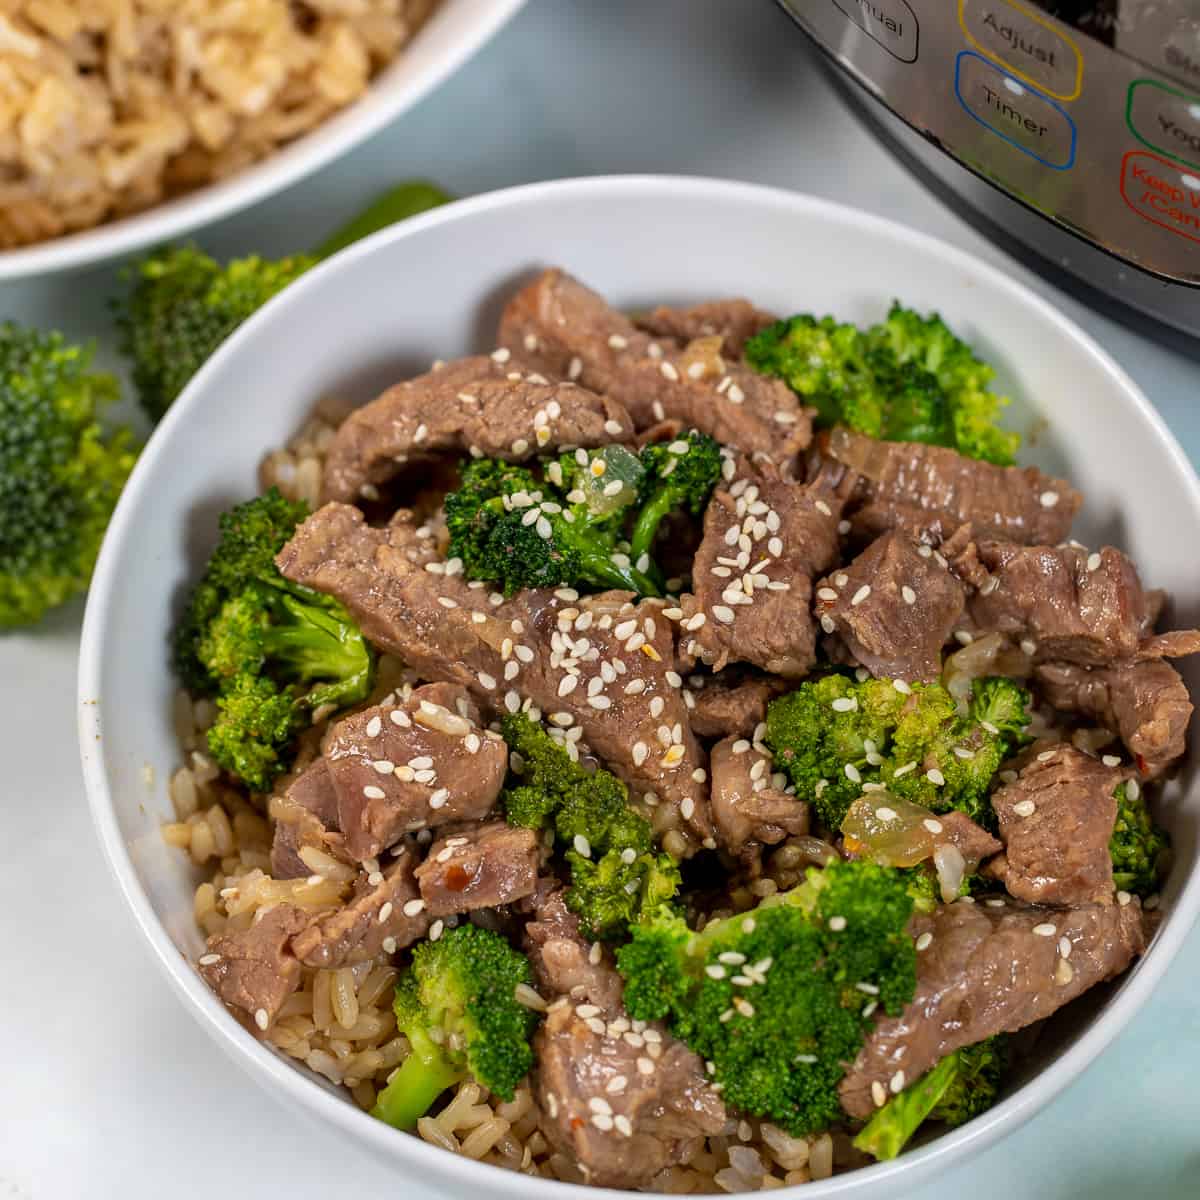 Beef and Broccoli in white bowl topped with sesaame seeds